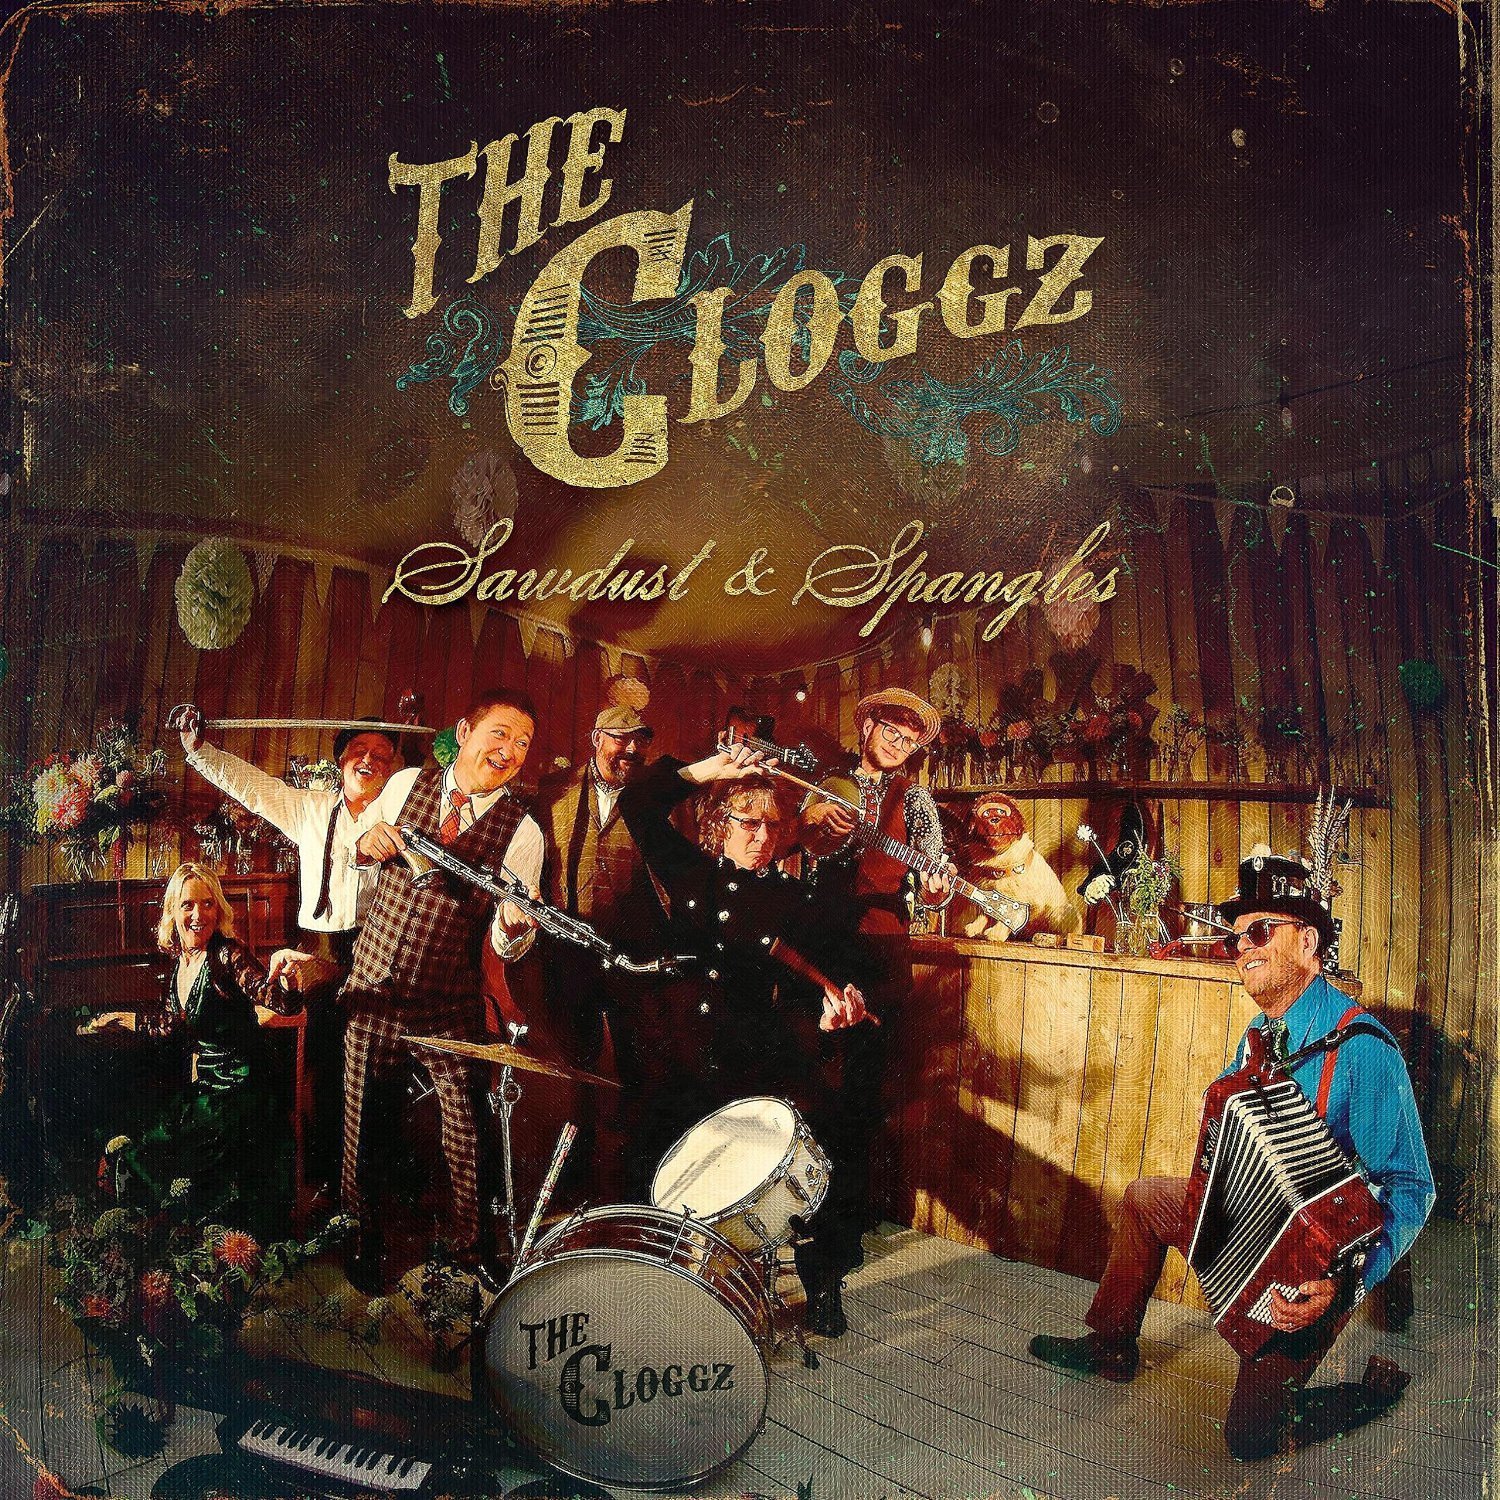 THE CLOGGZ - Sawdust and Spangles cover 